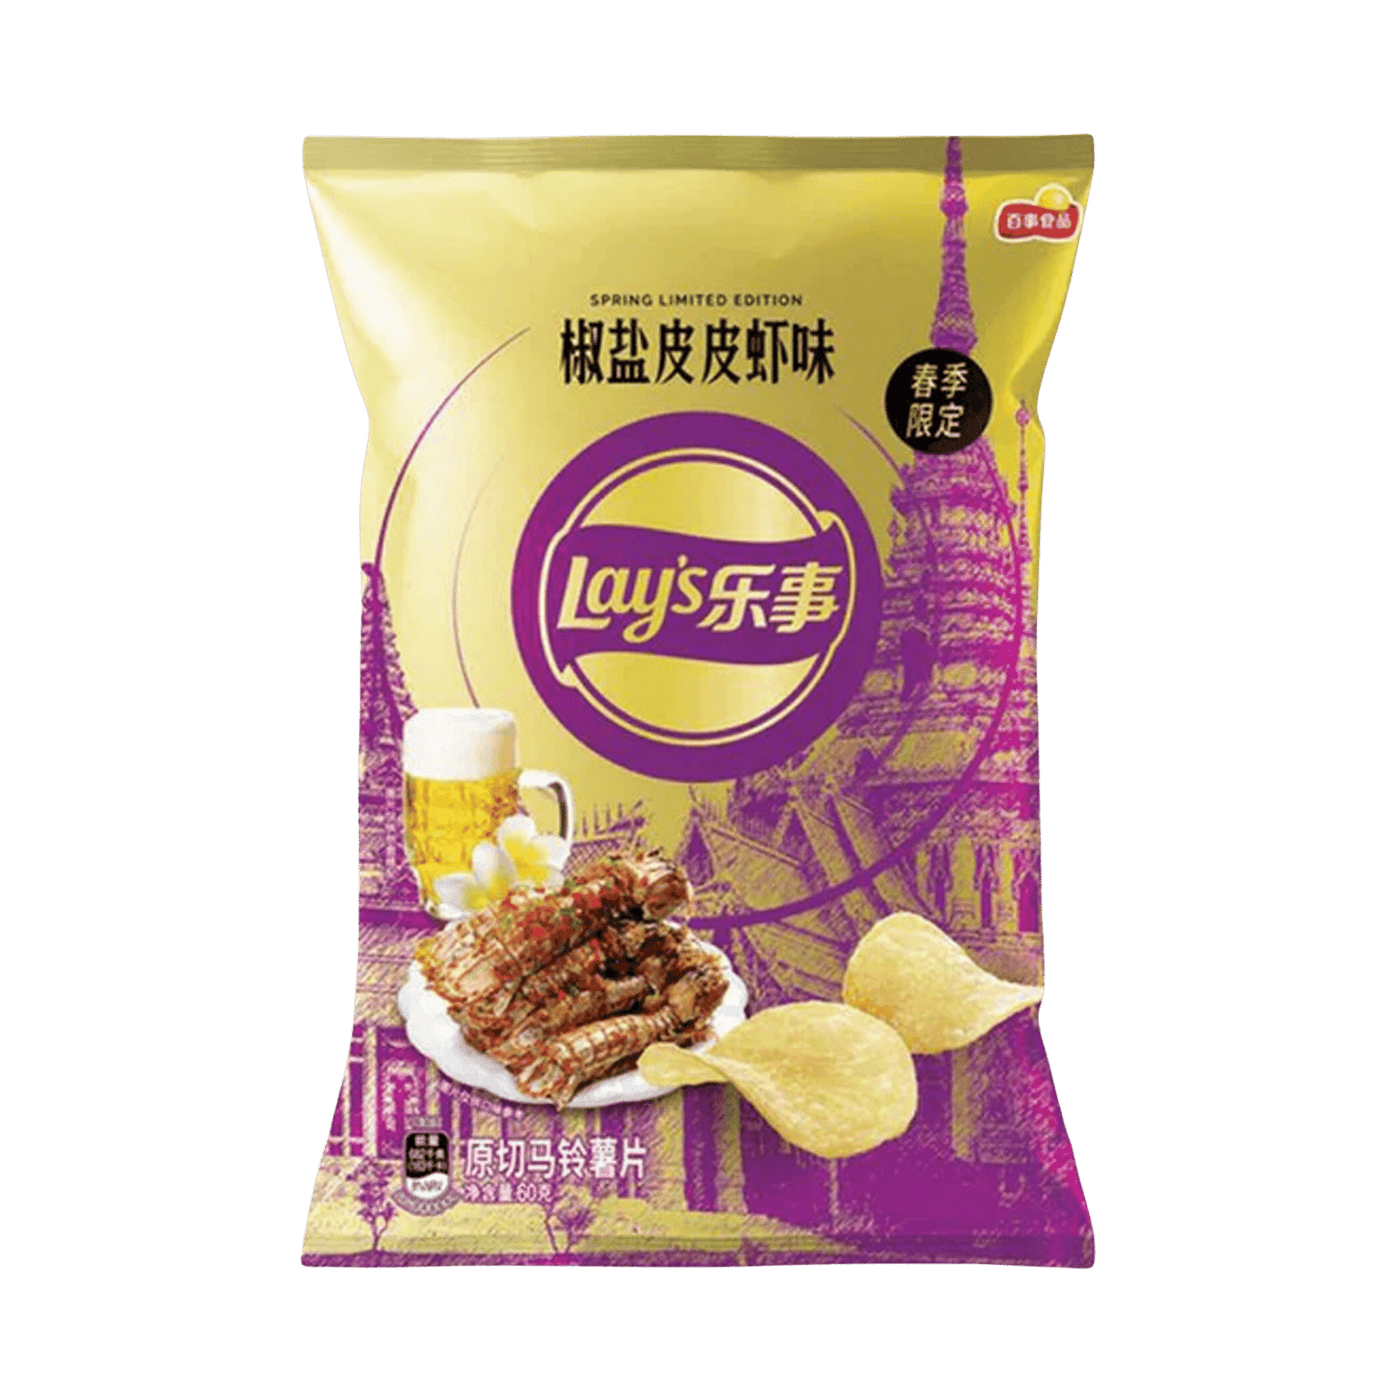 Lay's - Limited Edition - Asia